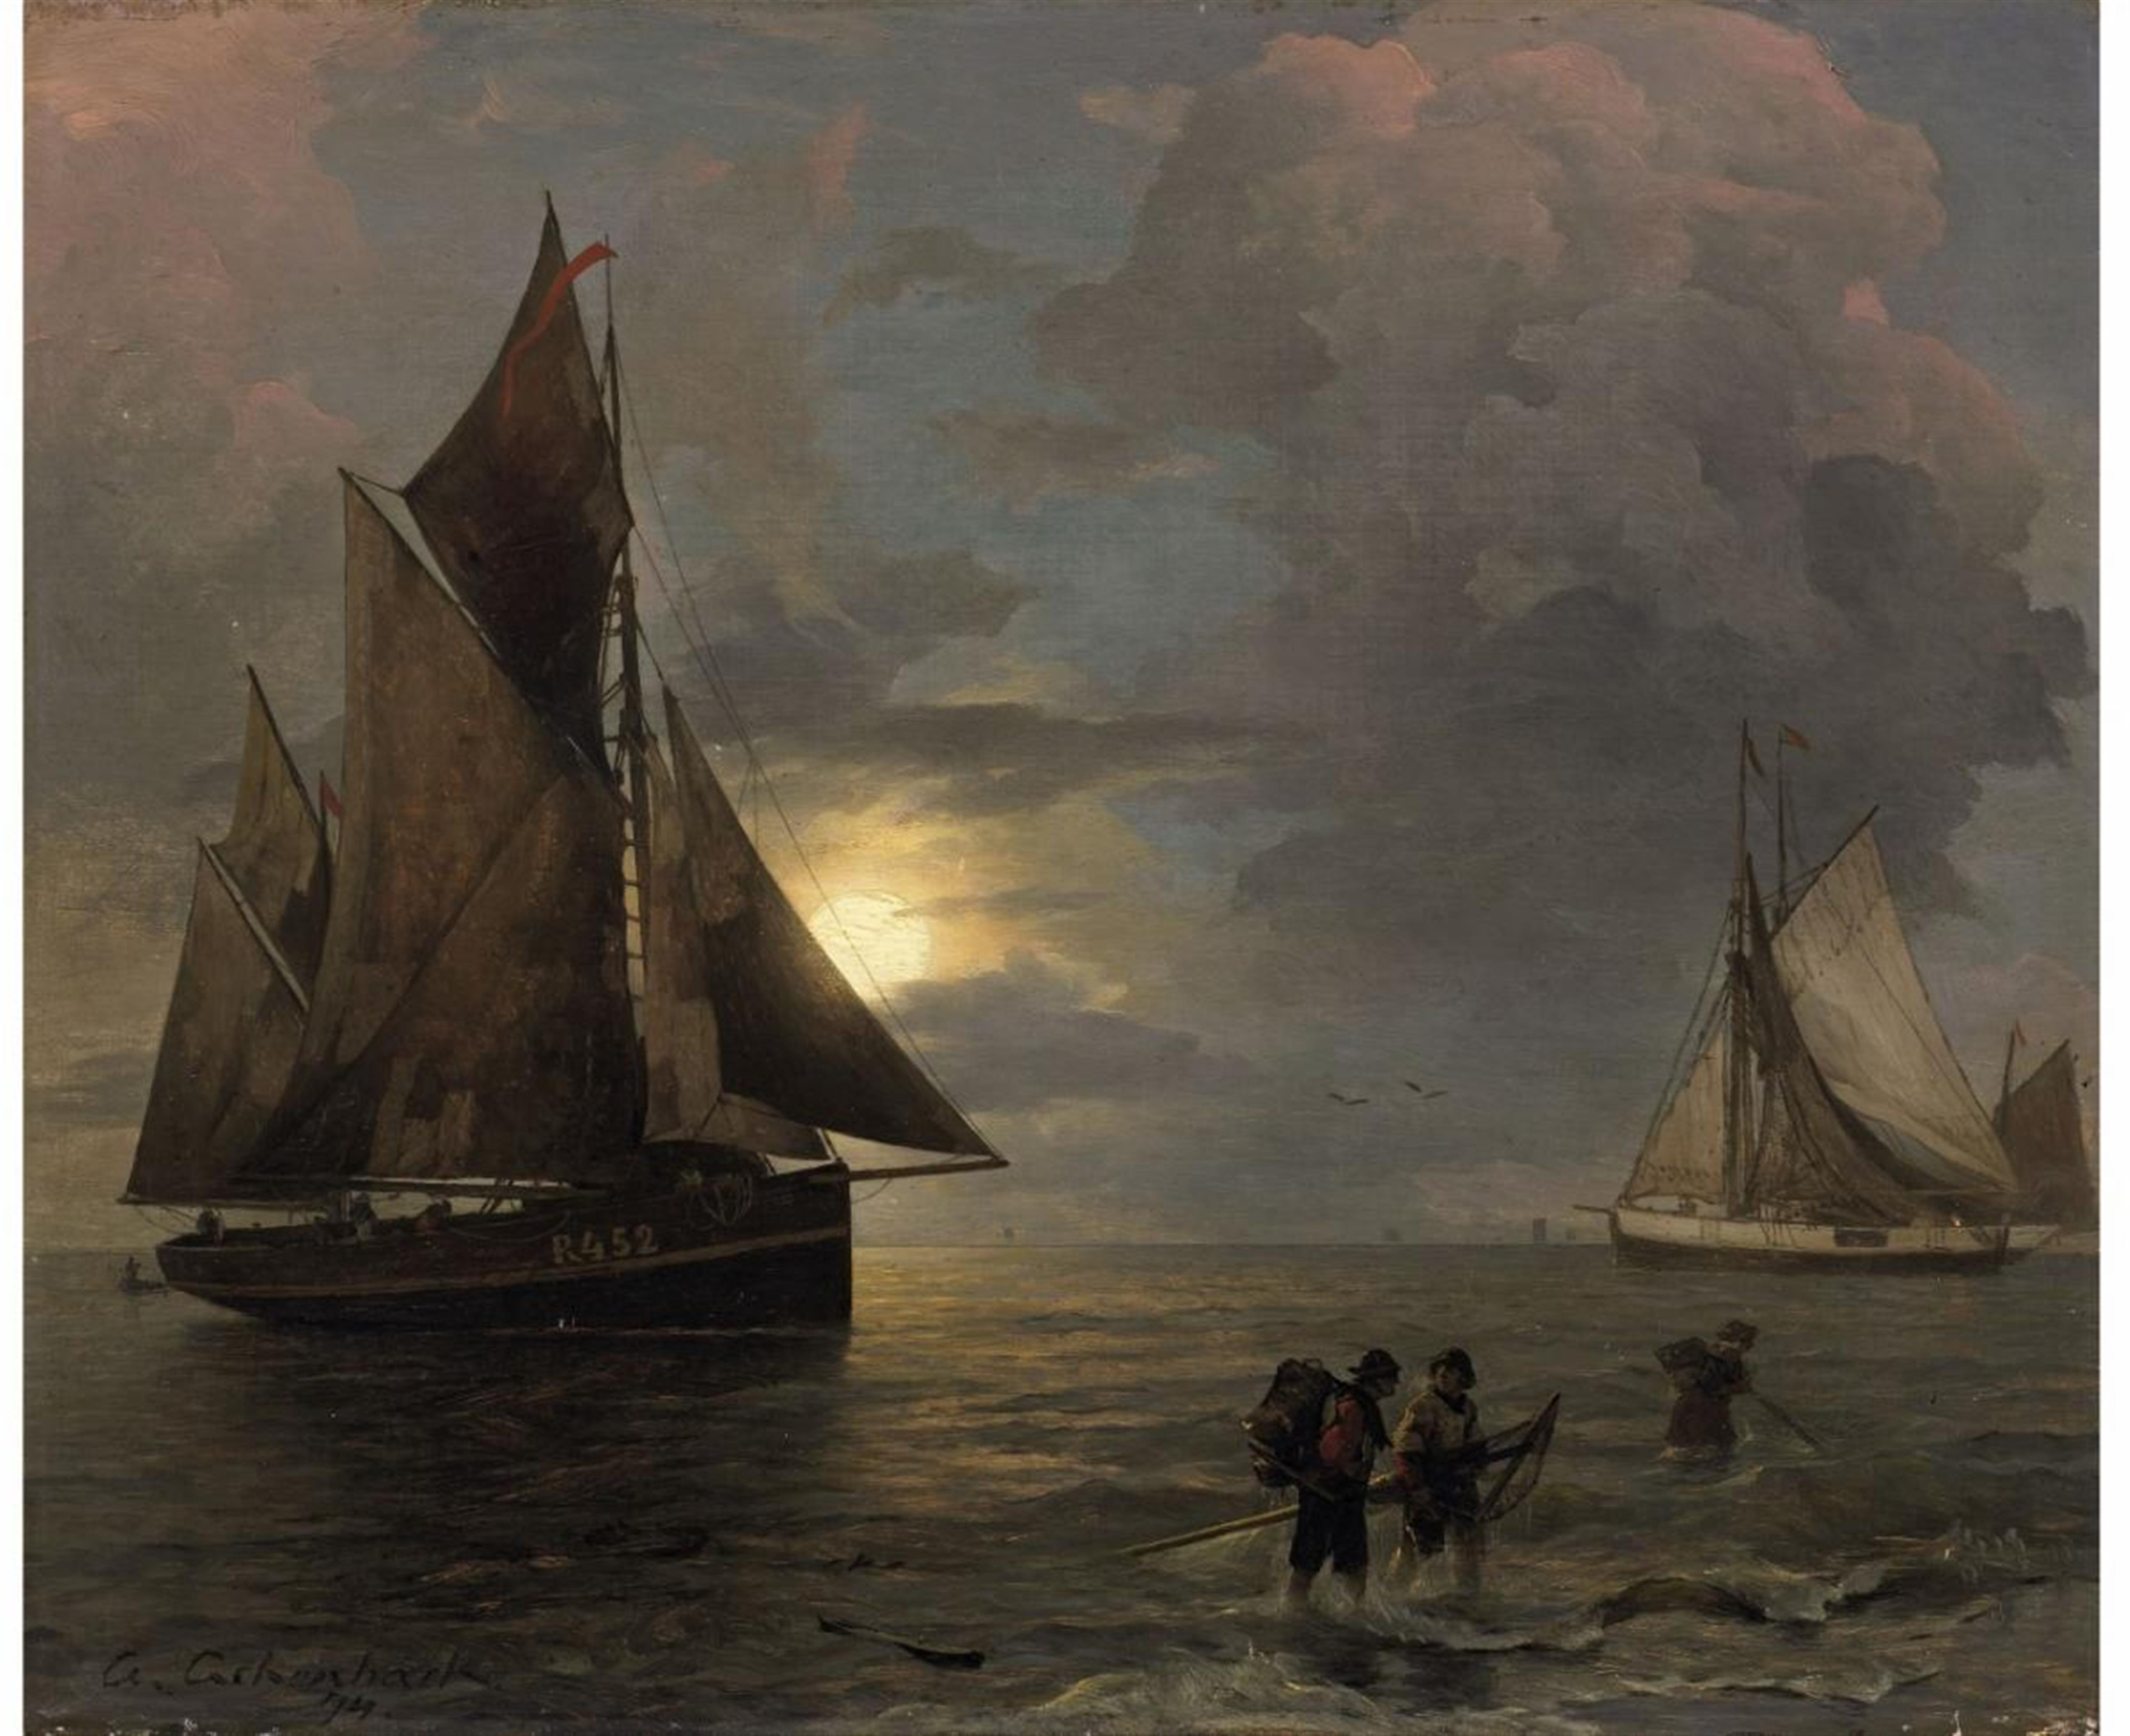 Andreas Achenbach - A Coastal Landscape with Sailing Ships by Moonlight - image-1